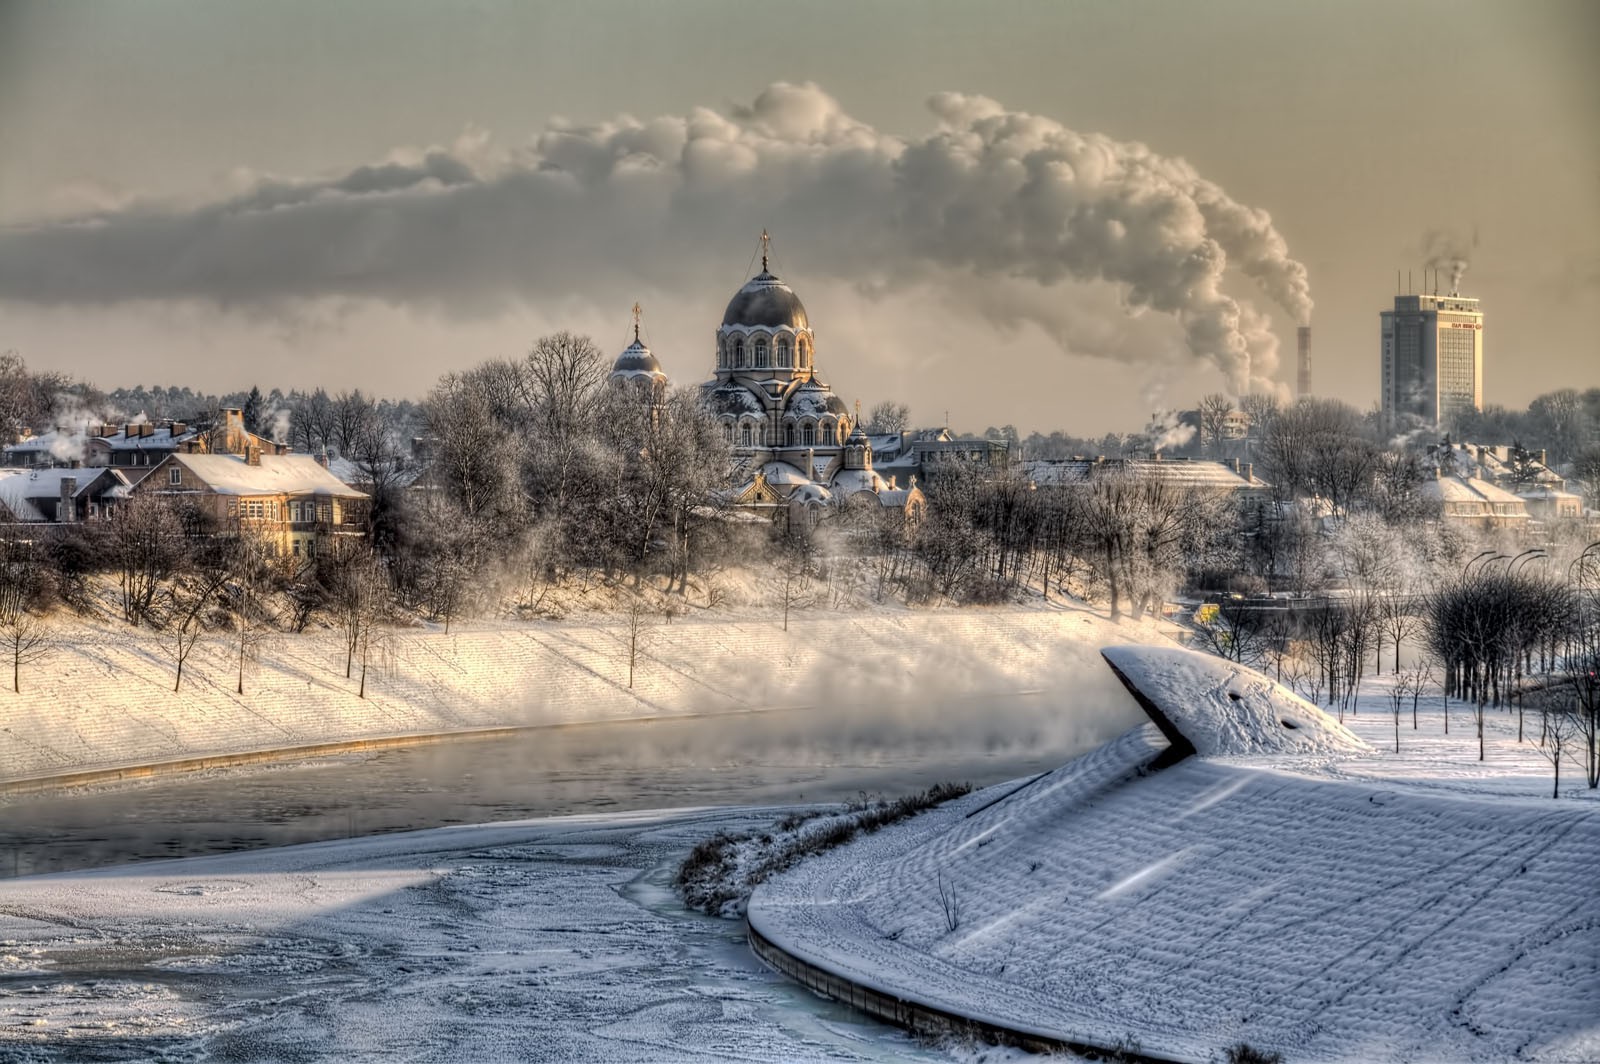 architecture, City, Cityscape, Trees, Building, Lithuania, Landscape, Winter, Snow, Cathedral, Smoke, Chimneys, Frost, Frozen River Wallpaper